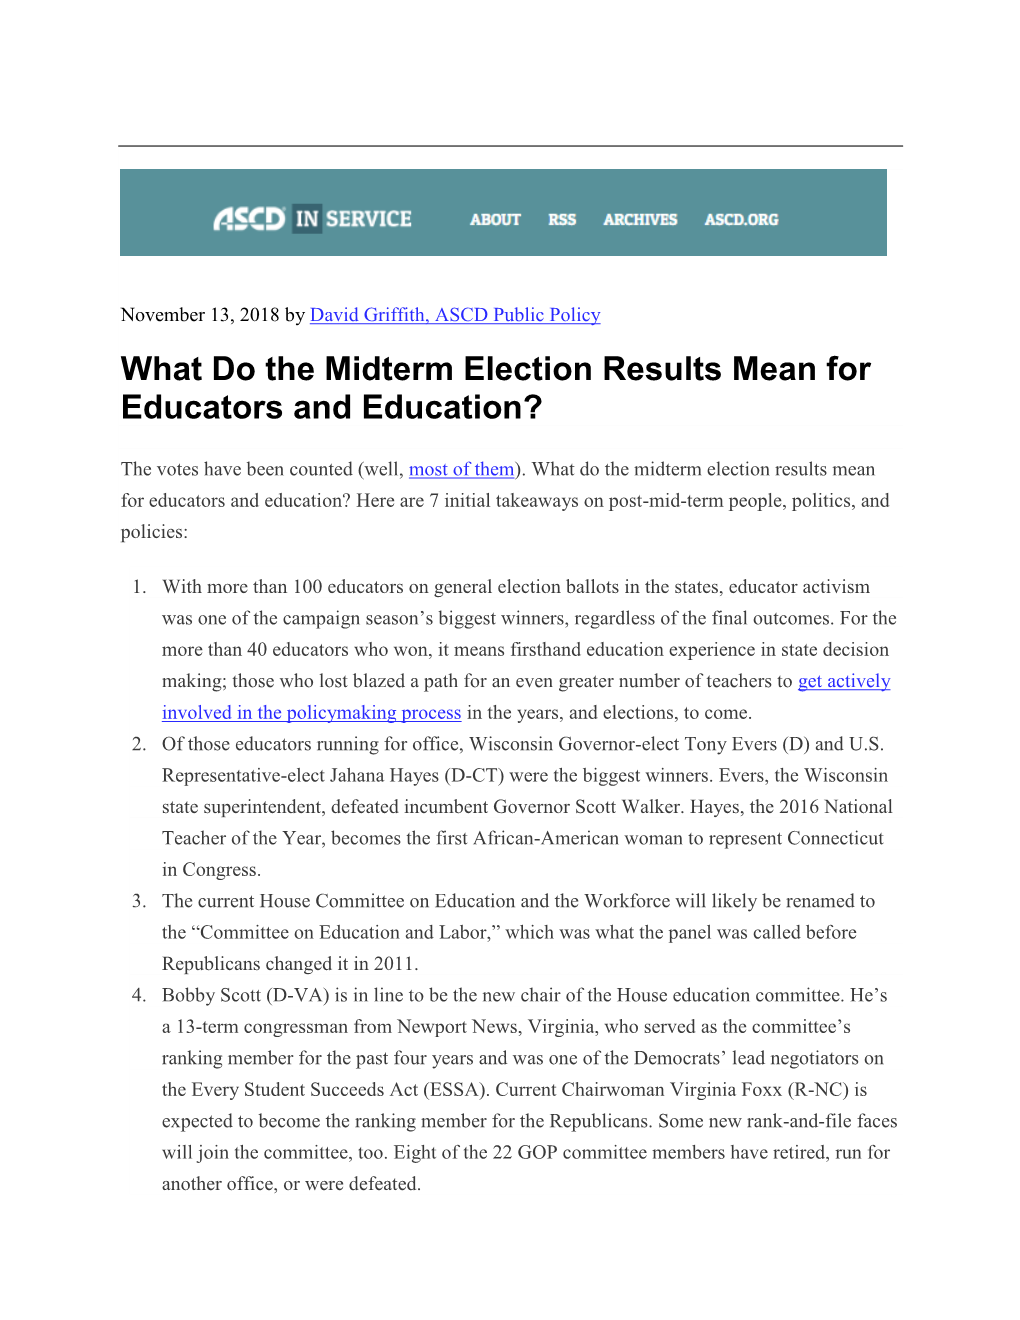 What Do the Midterm Election Results Mean for Educators and Education?